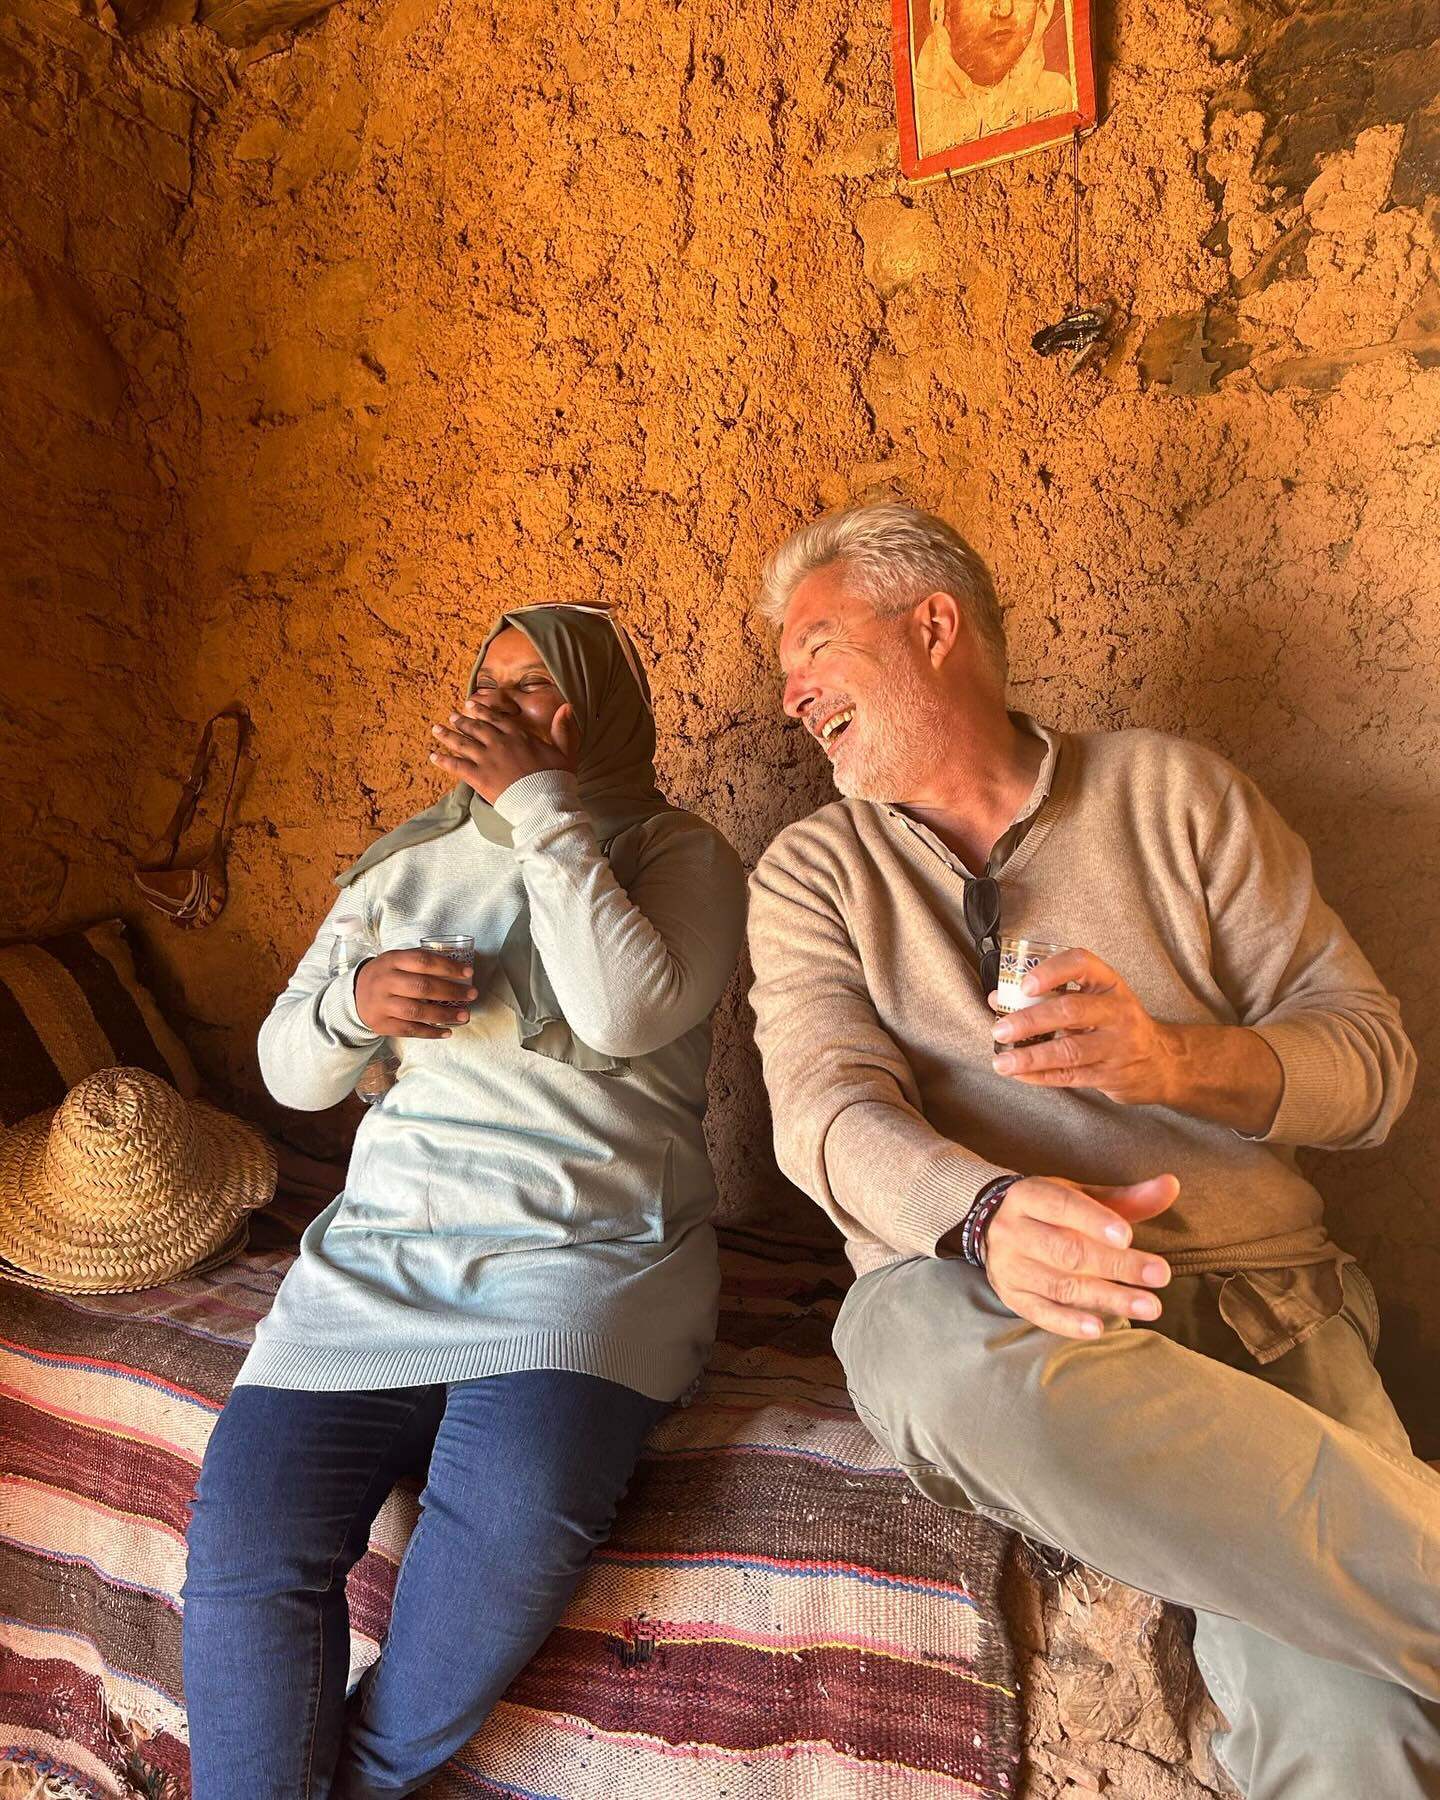 French hotelier Thierry Teyssier at Dar Ahlam, in Ouarzazate, Morocco, the boutique hideaway he opened 22 years ago. Photo: Instagram/@teyssierthierry